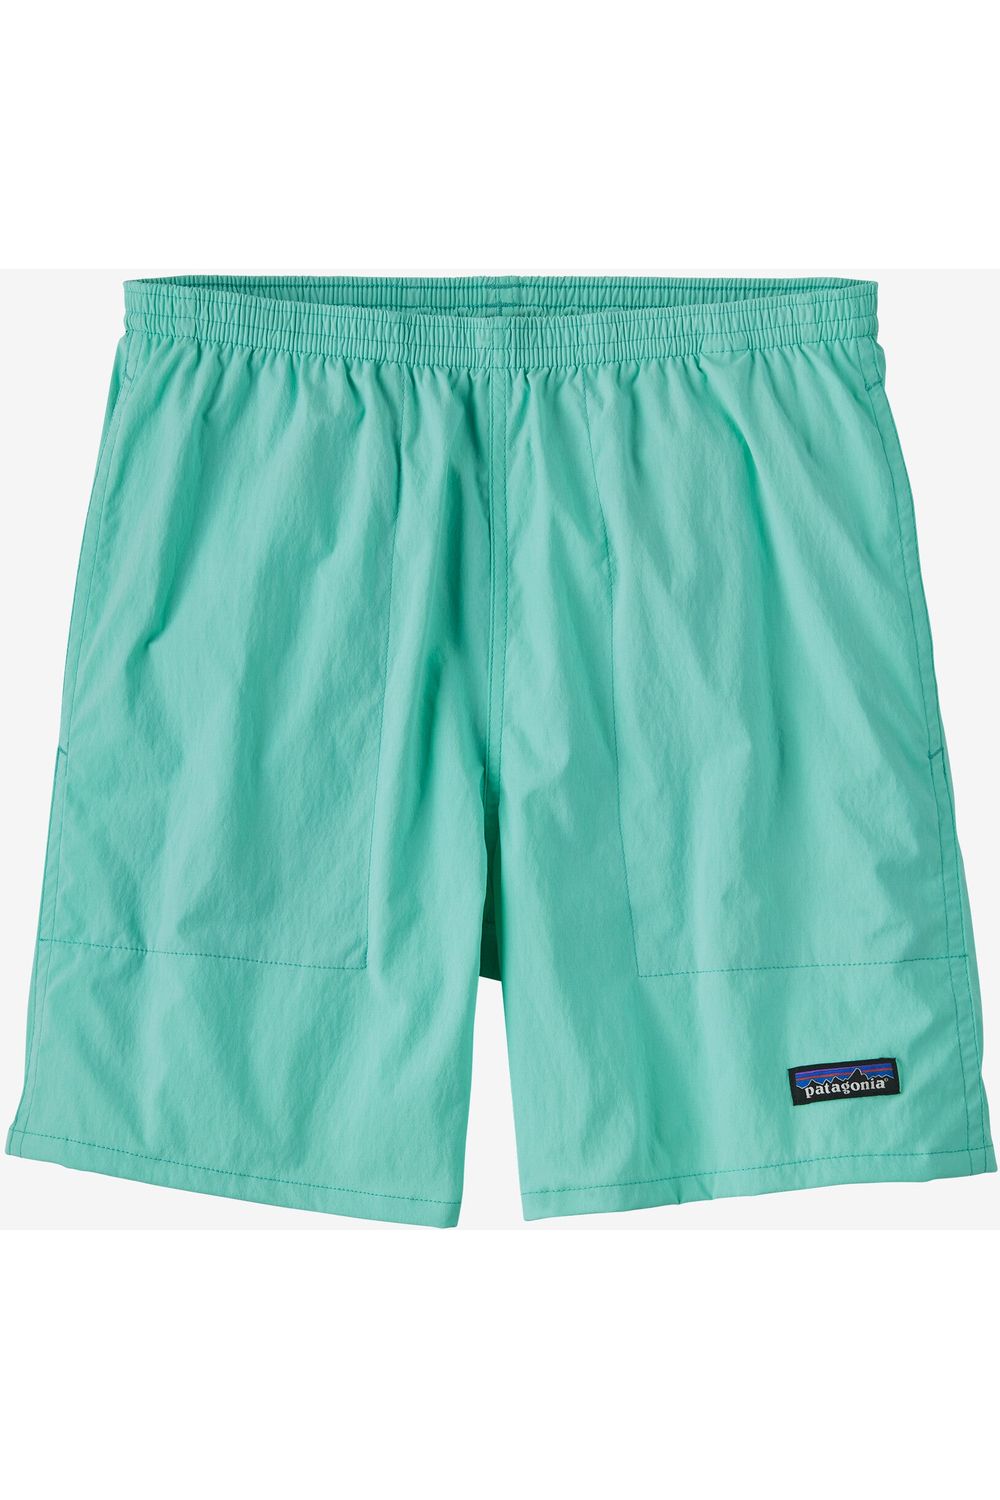 Patagonia Baggies Lights 6.5 in Board Shorts Early Teal